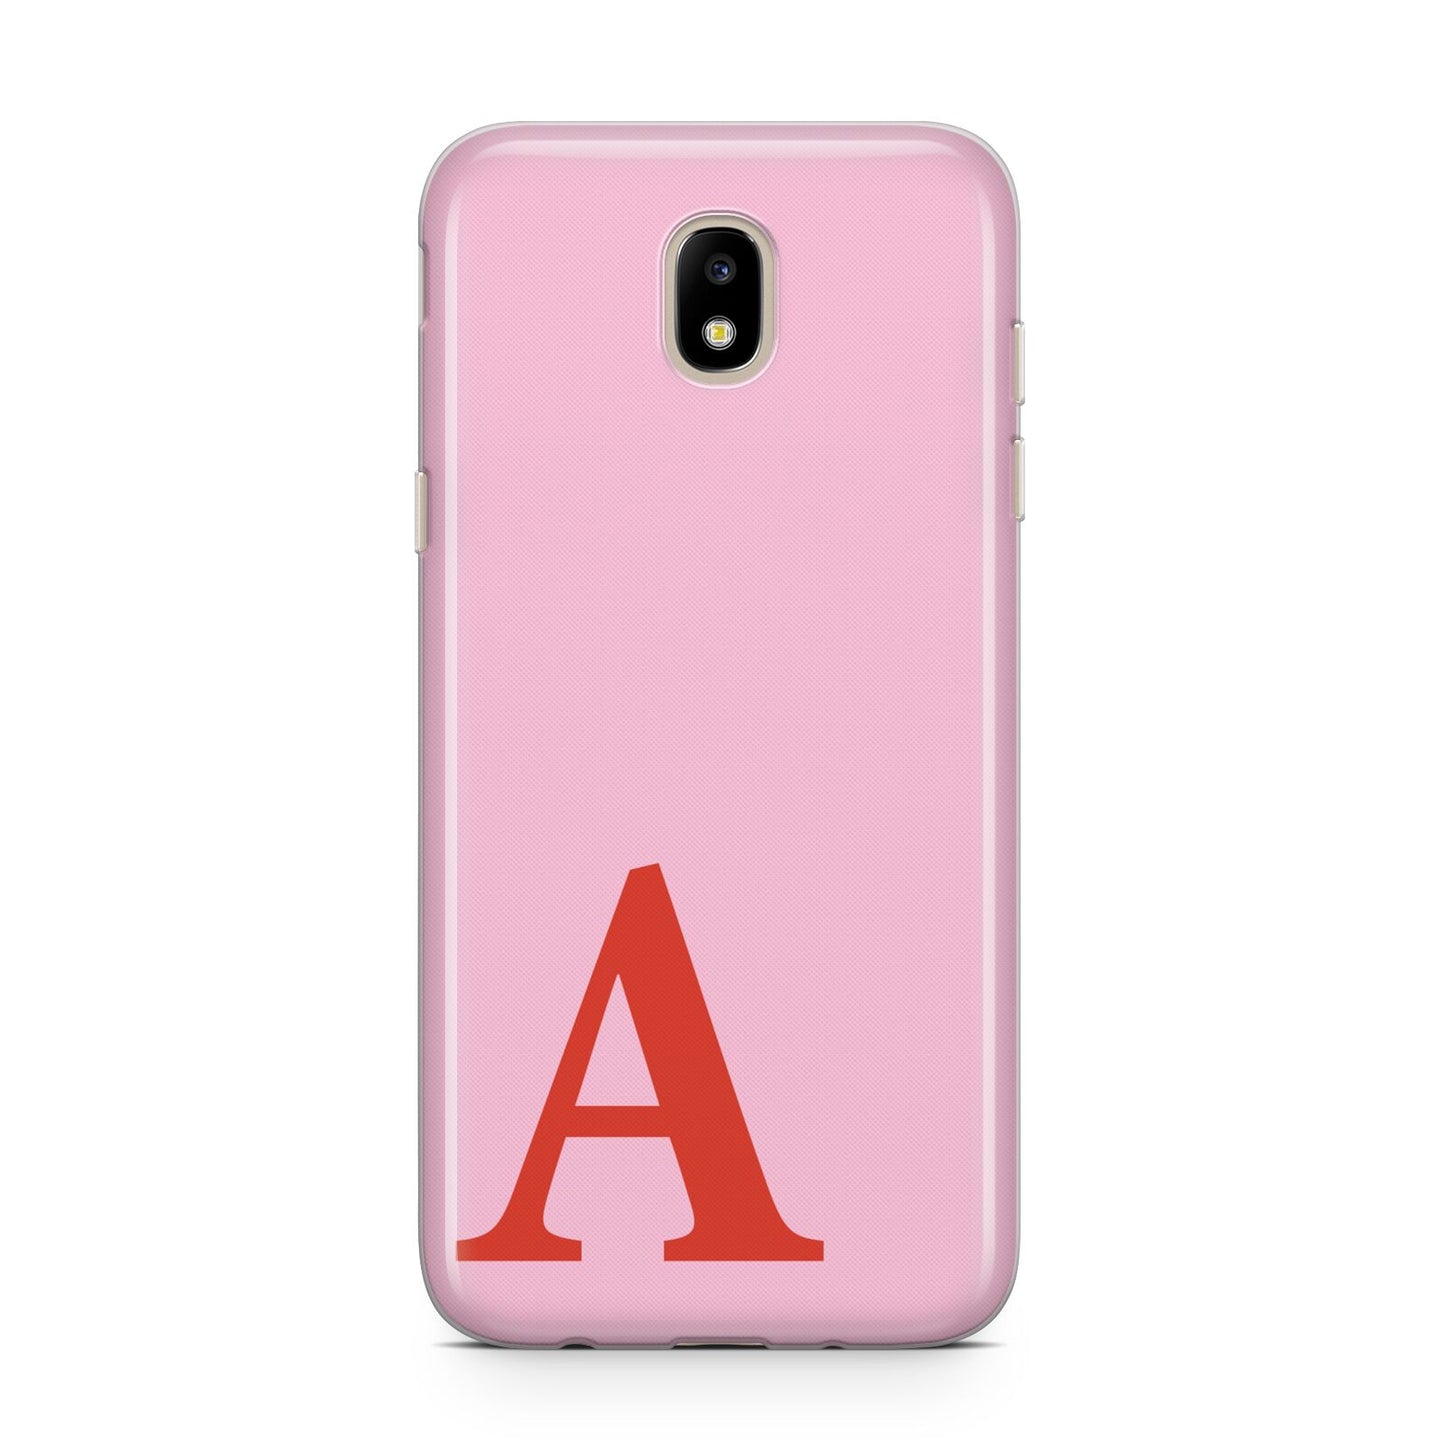 Personalised Pink and Red Samsung J5 2017 Case